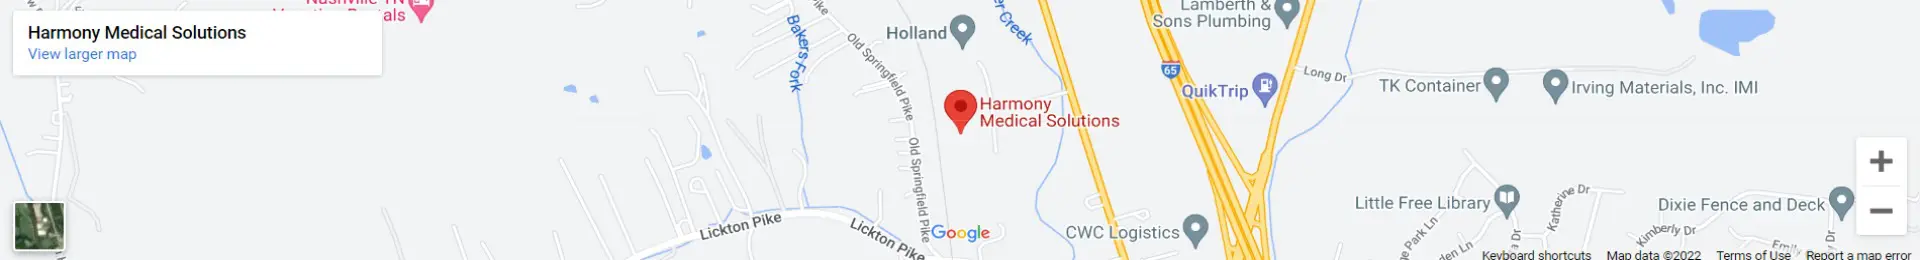 A map of harmony medical solutions location